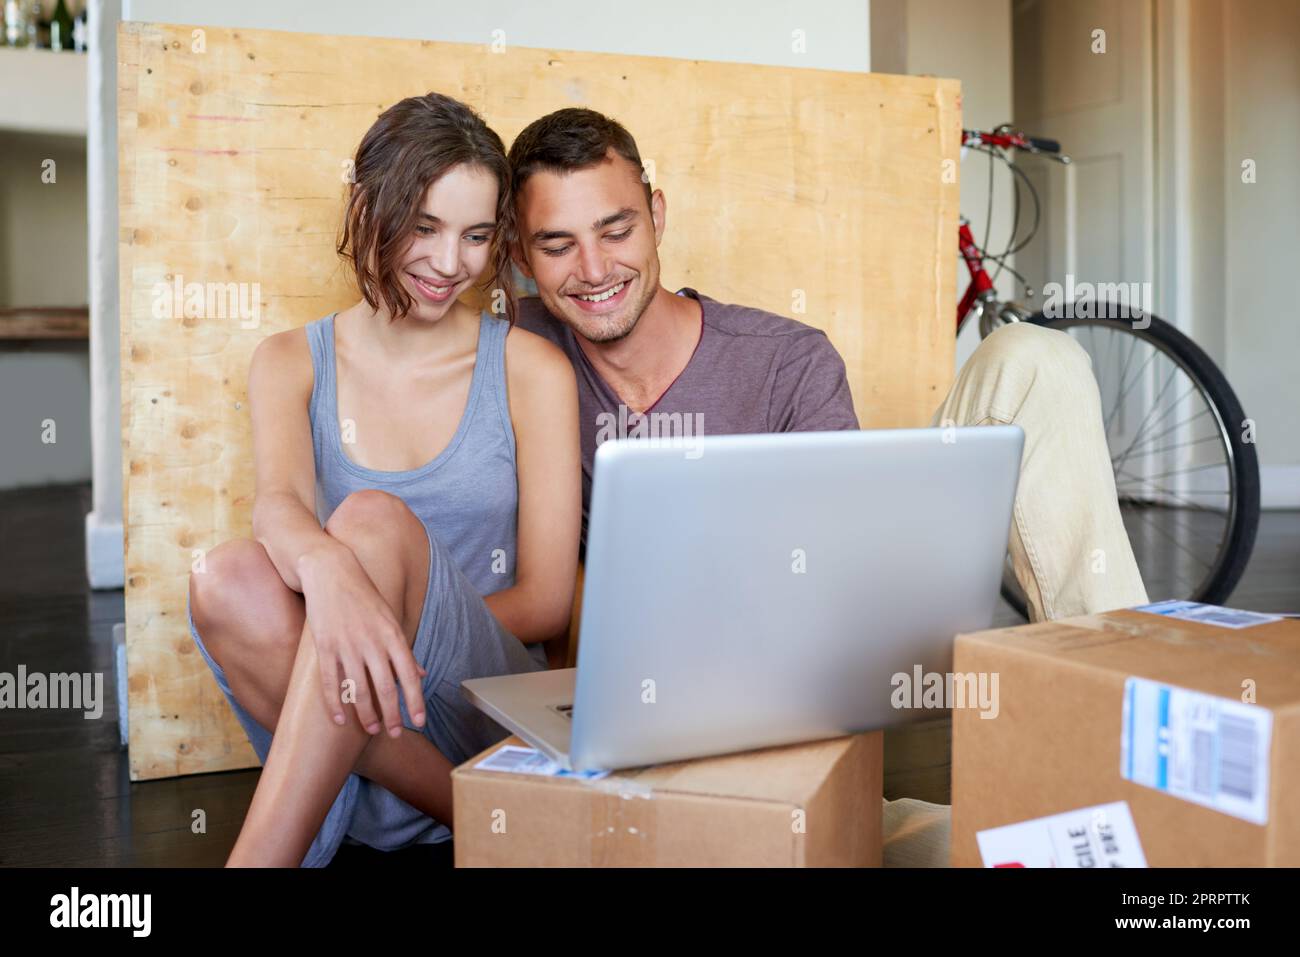 Giving the courier company a five-star rating on moving day. an affectionate young couple using a laptop on the floor at home. Stock Photo